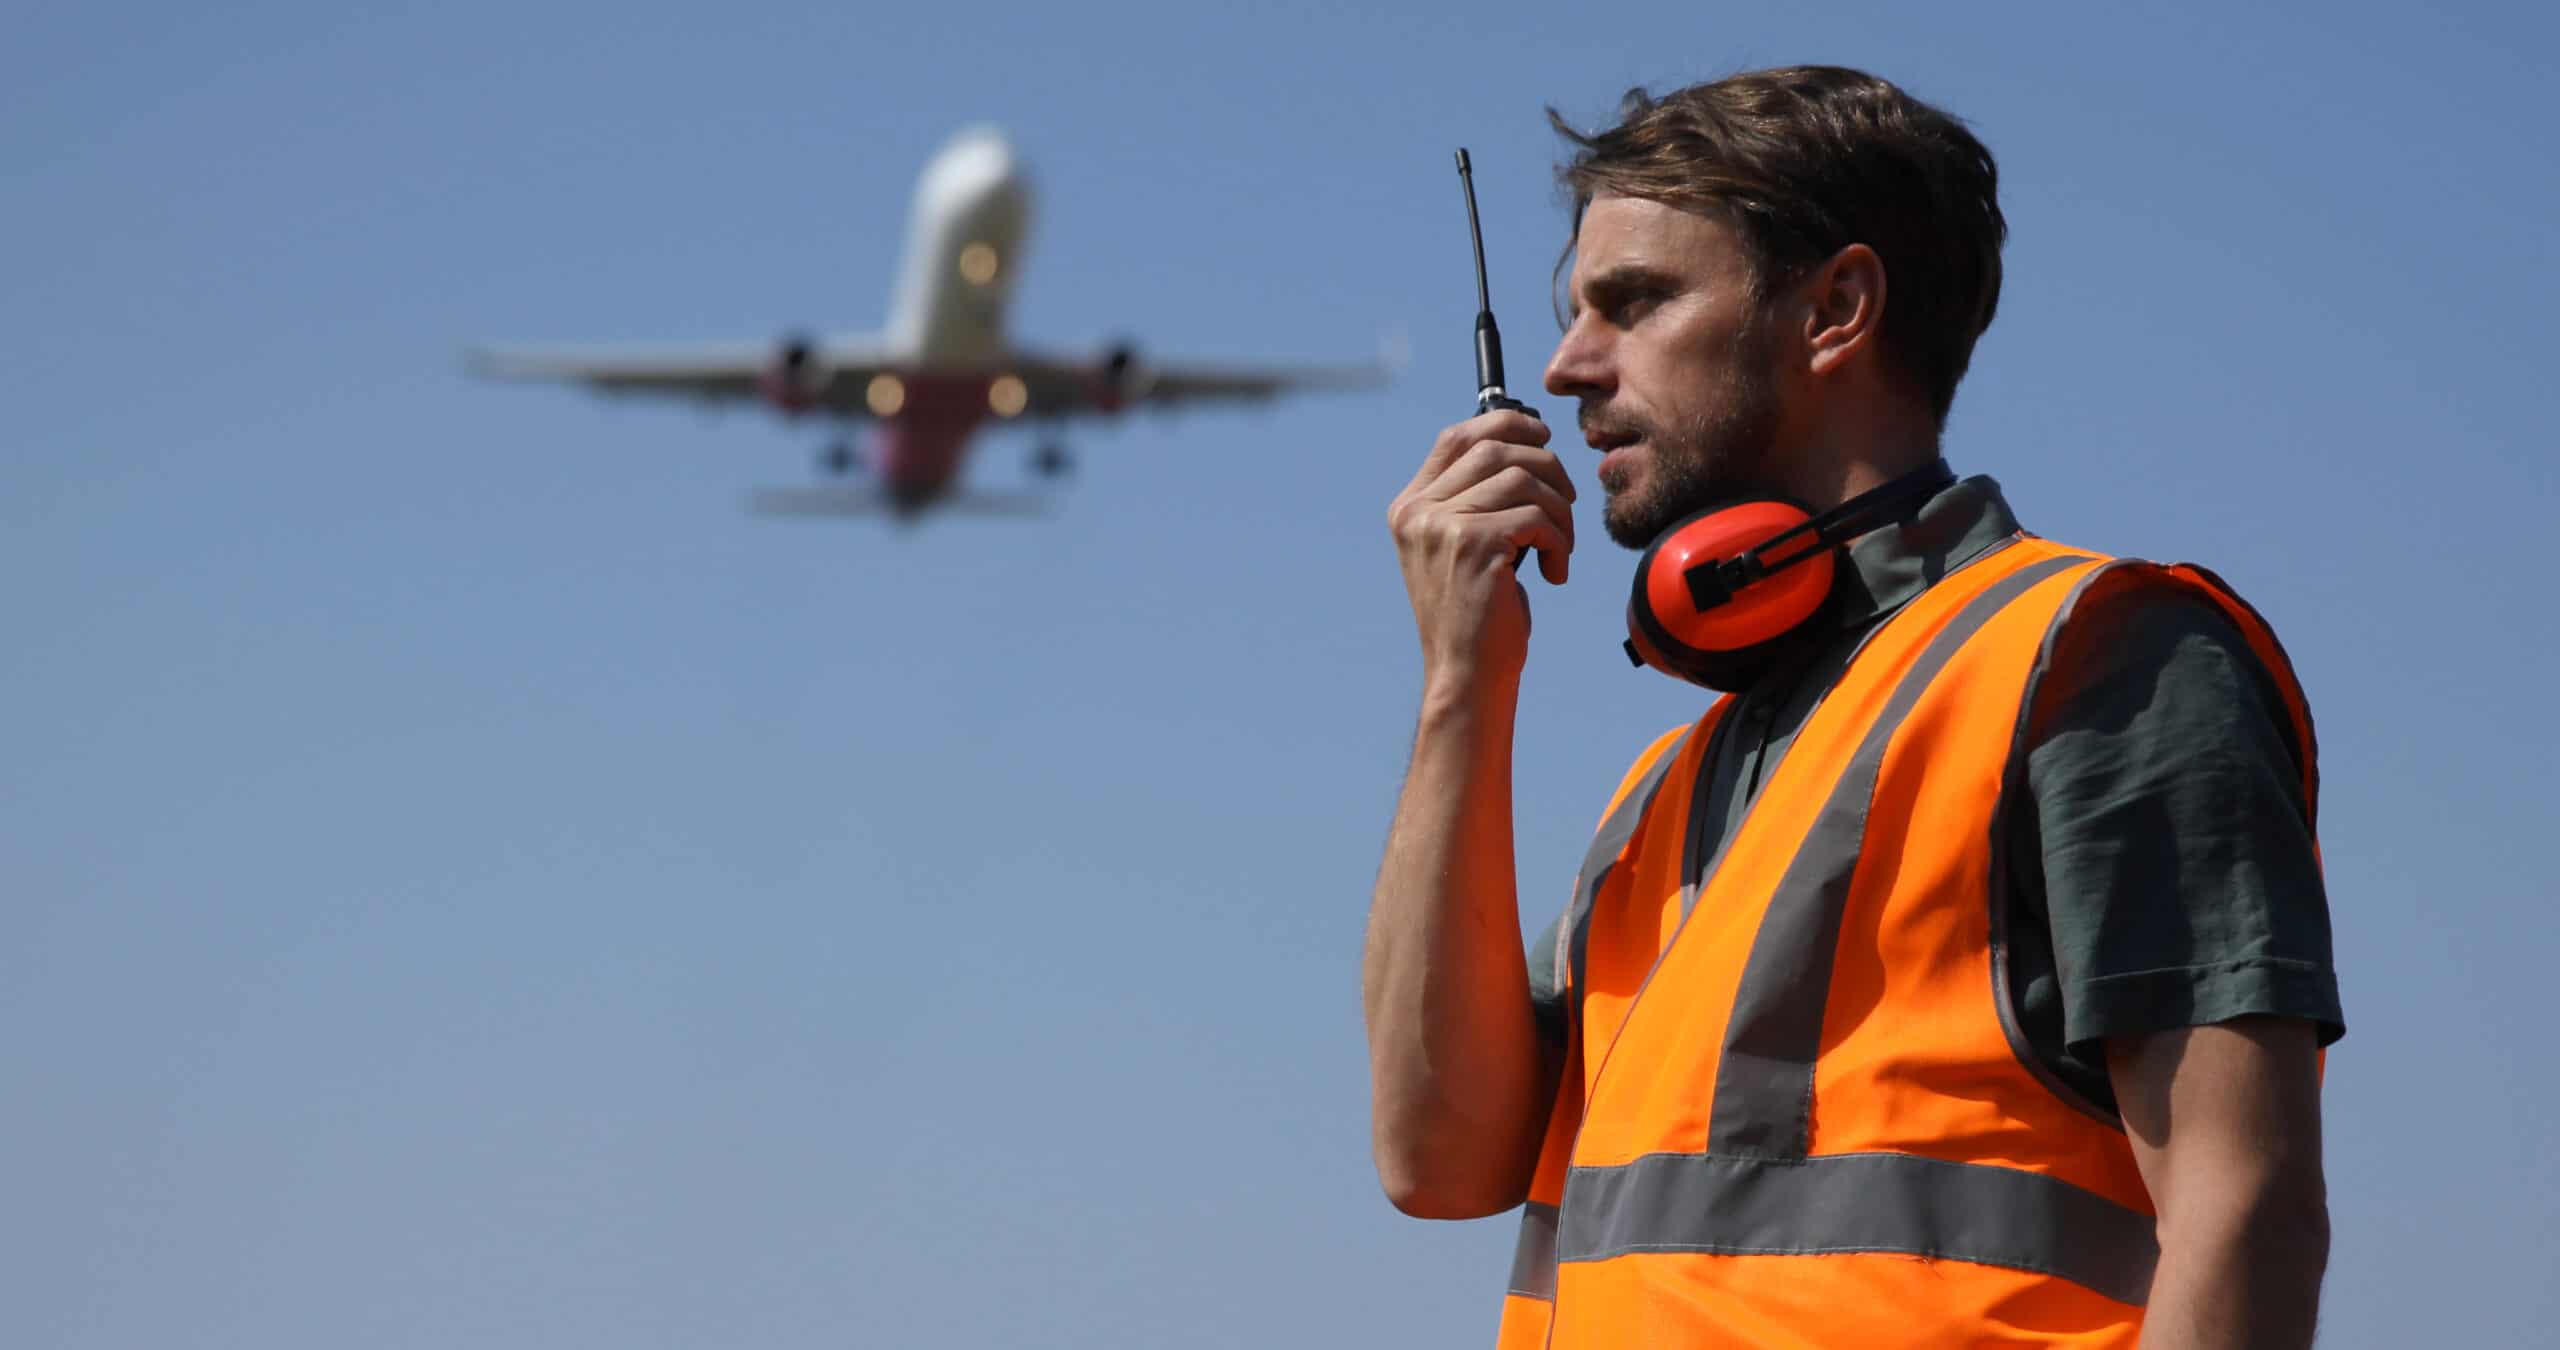 Image of a ground staff worker on a runway talking into a radio while an airliner flies overhead